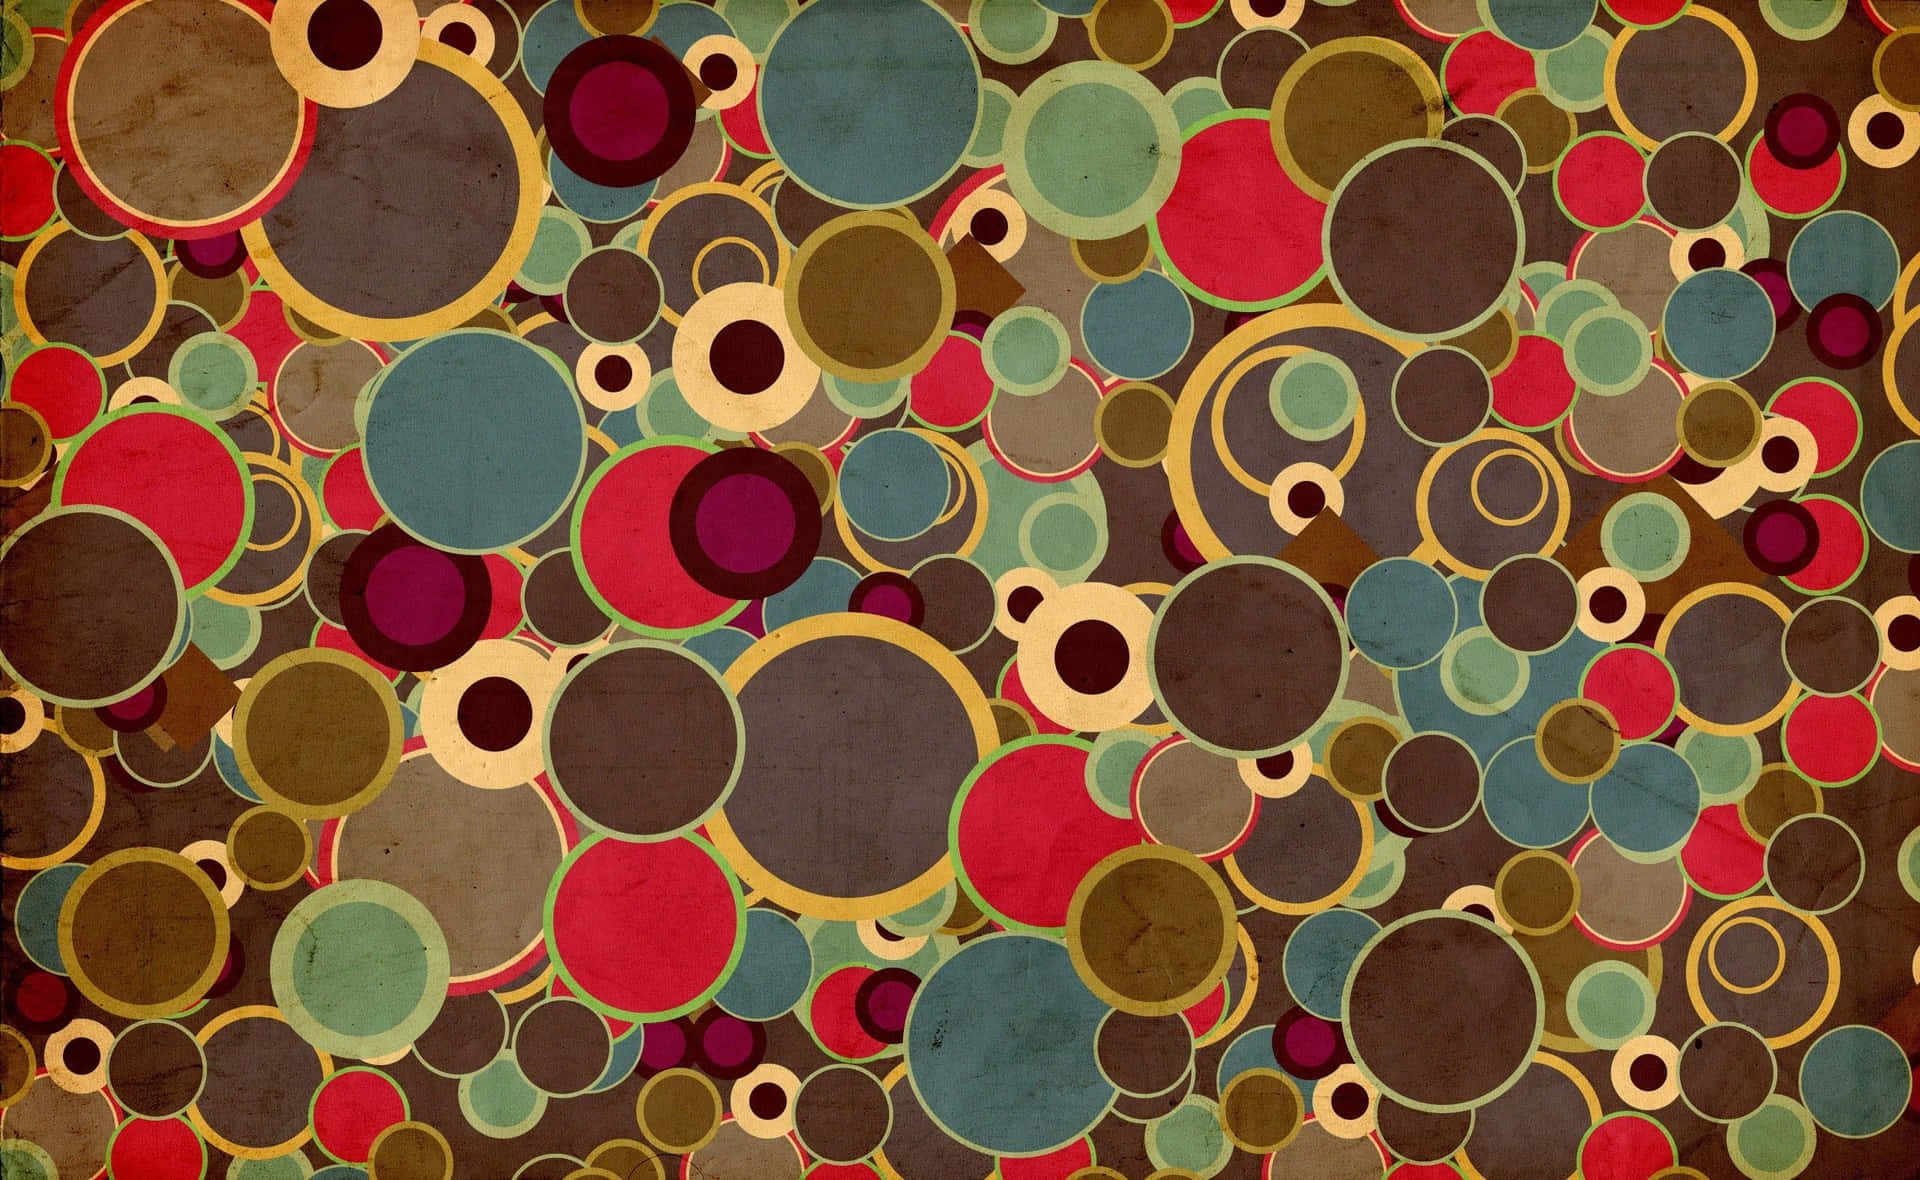 A Background With Circles In Different Colors